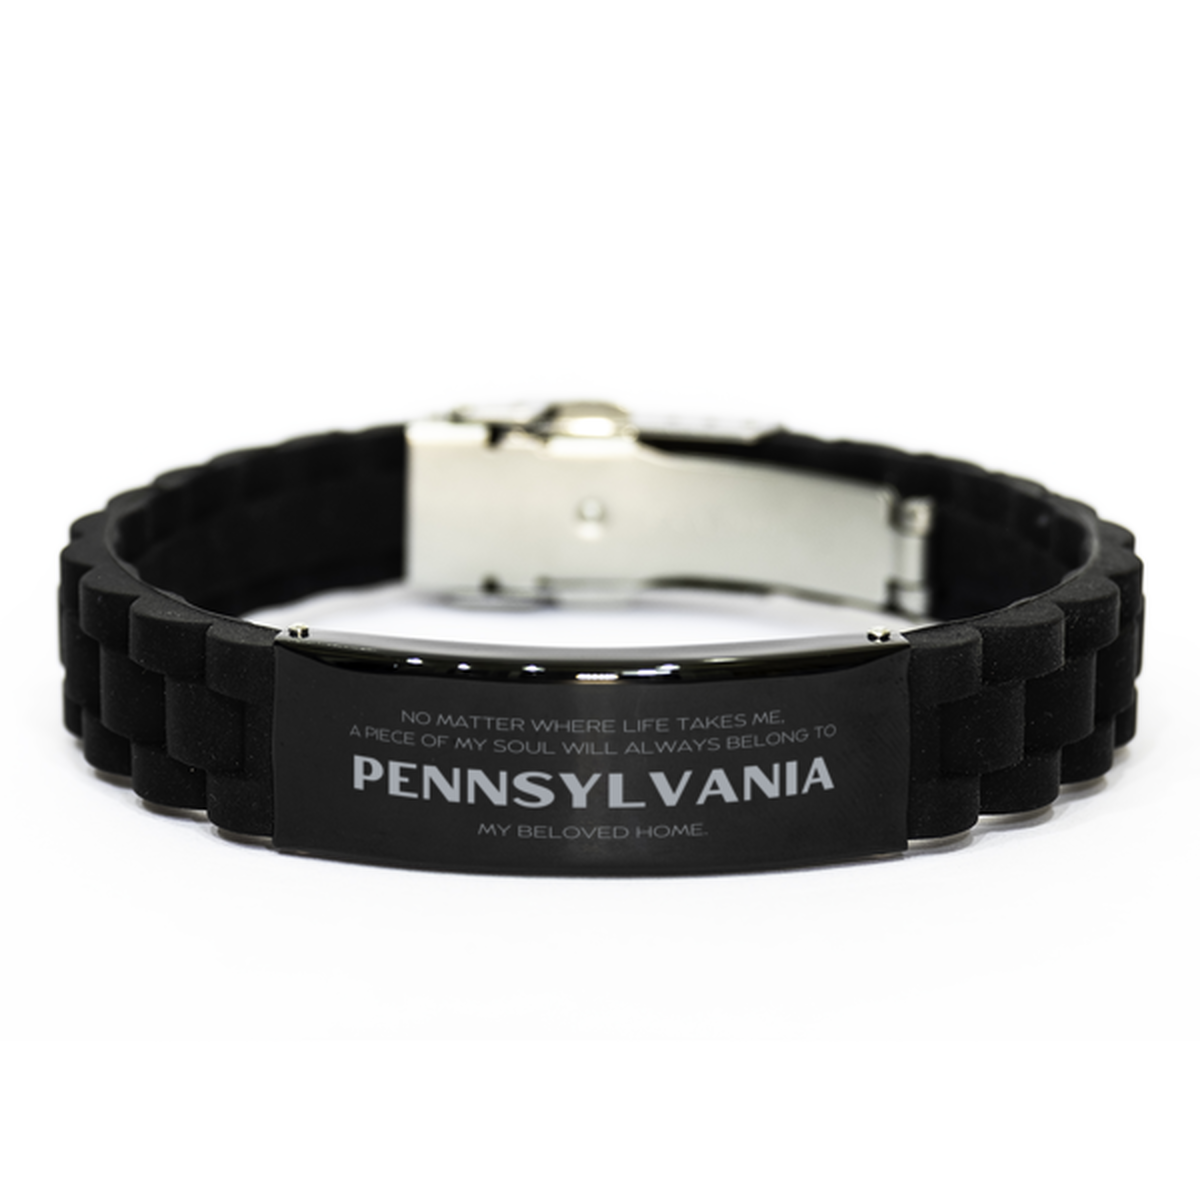 Love Pennsylvania State Gifts, My soul will always belong to Pennsylvania, Proud Black Glidelock Clasp Bracelet, Birthday Unique Gifts For Pennsylvania Men, Women, Friends